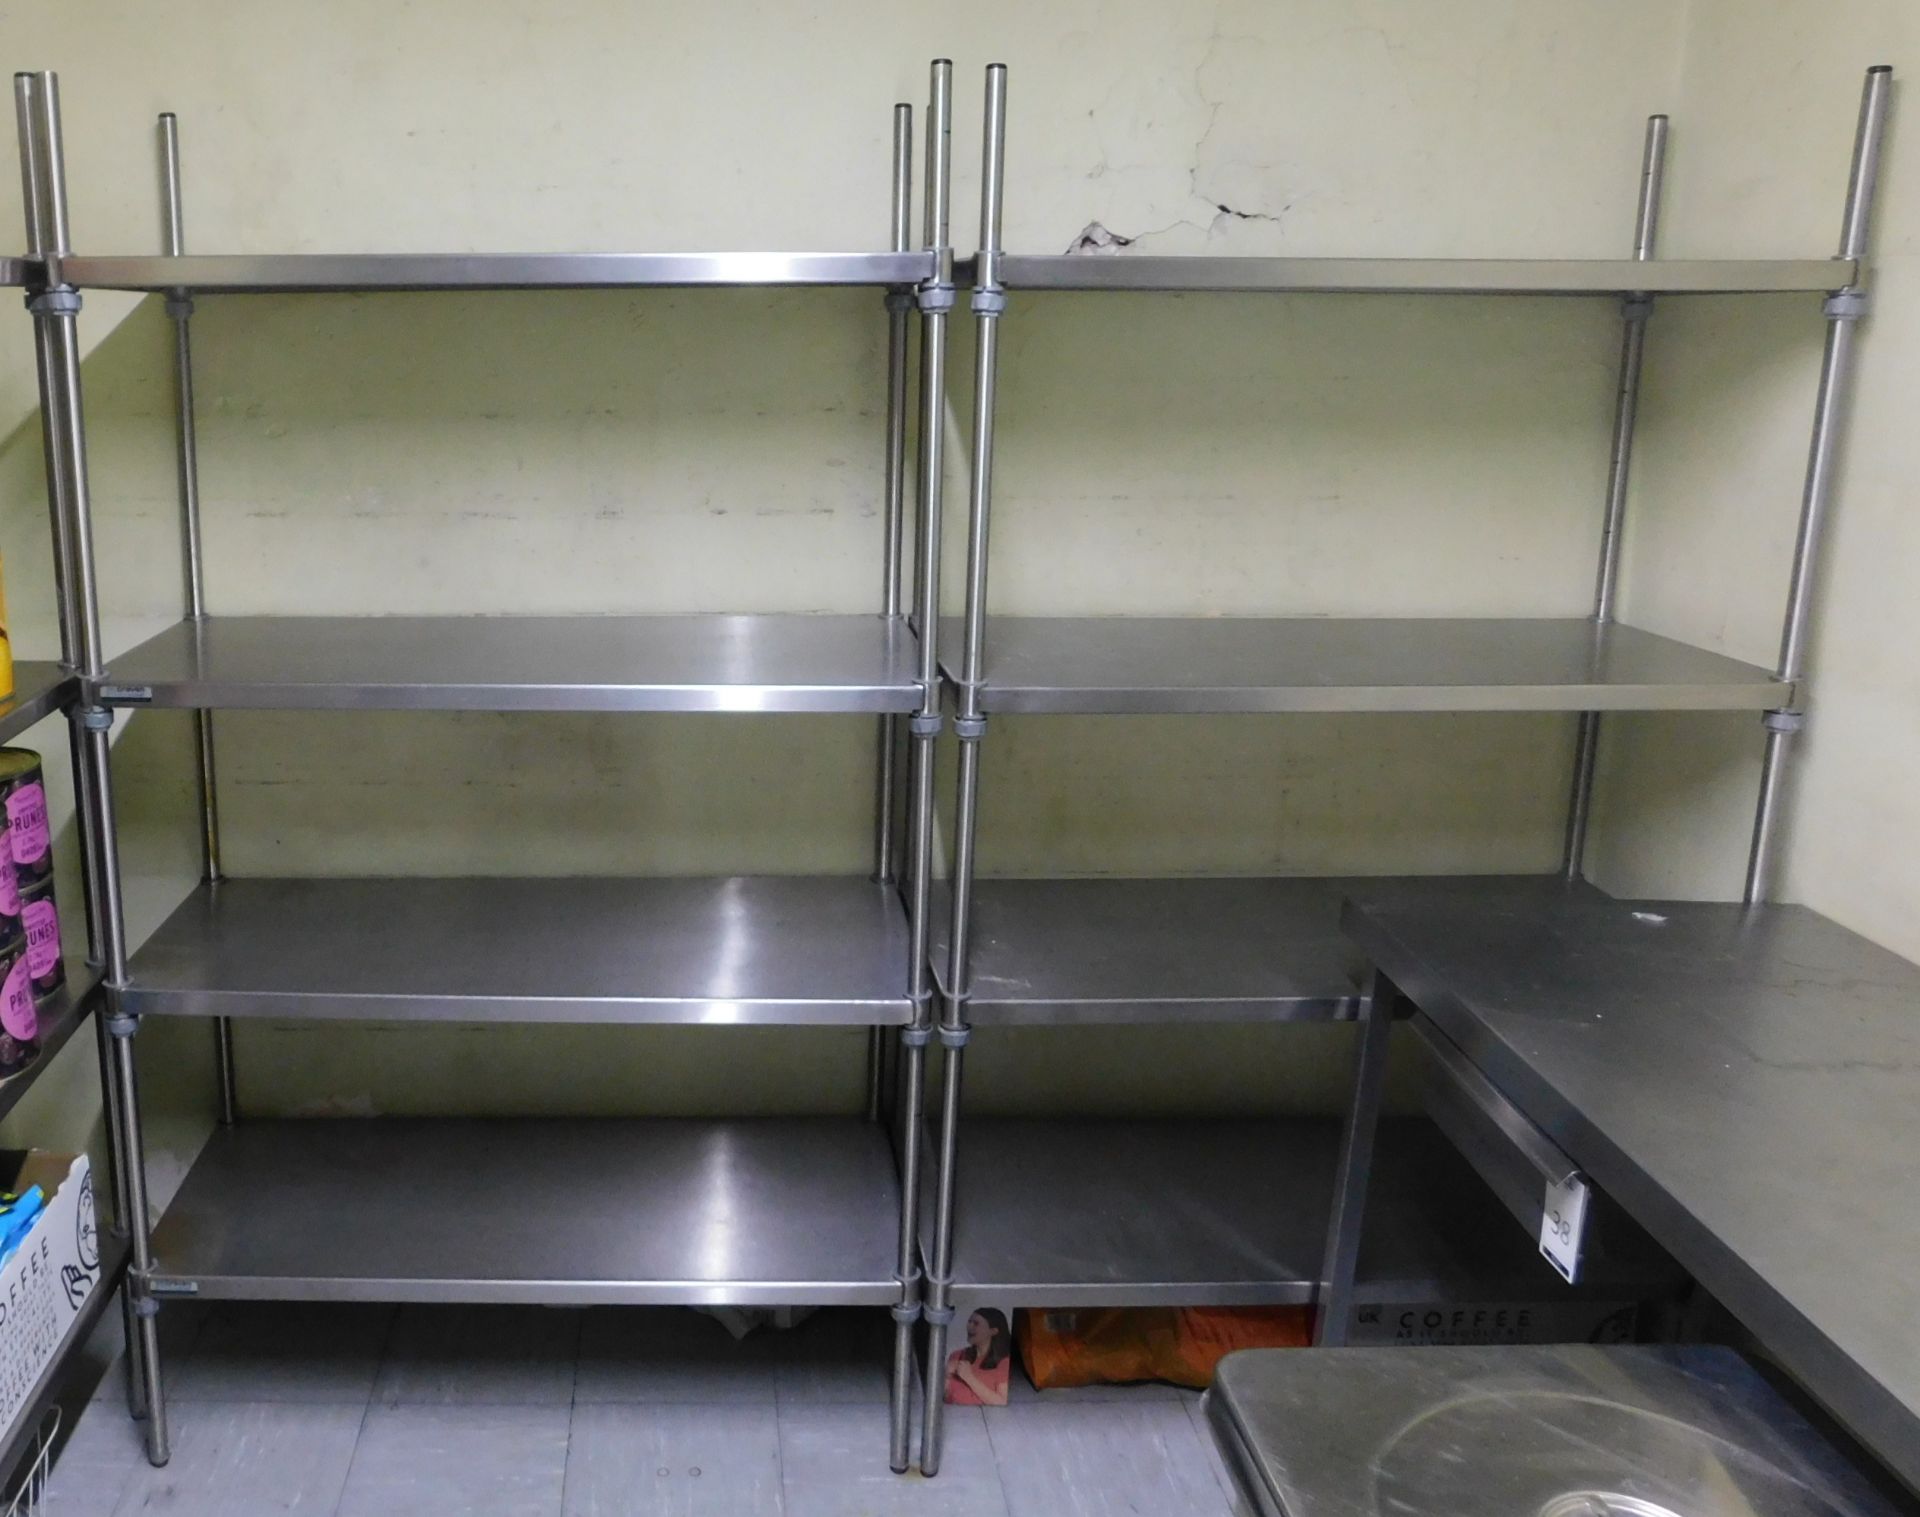 Five, 4-Tier Stainless Steel Light Weight Racking Shelf Units (Excluding Contents) (Location - Image 2 of 2